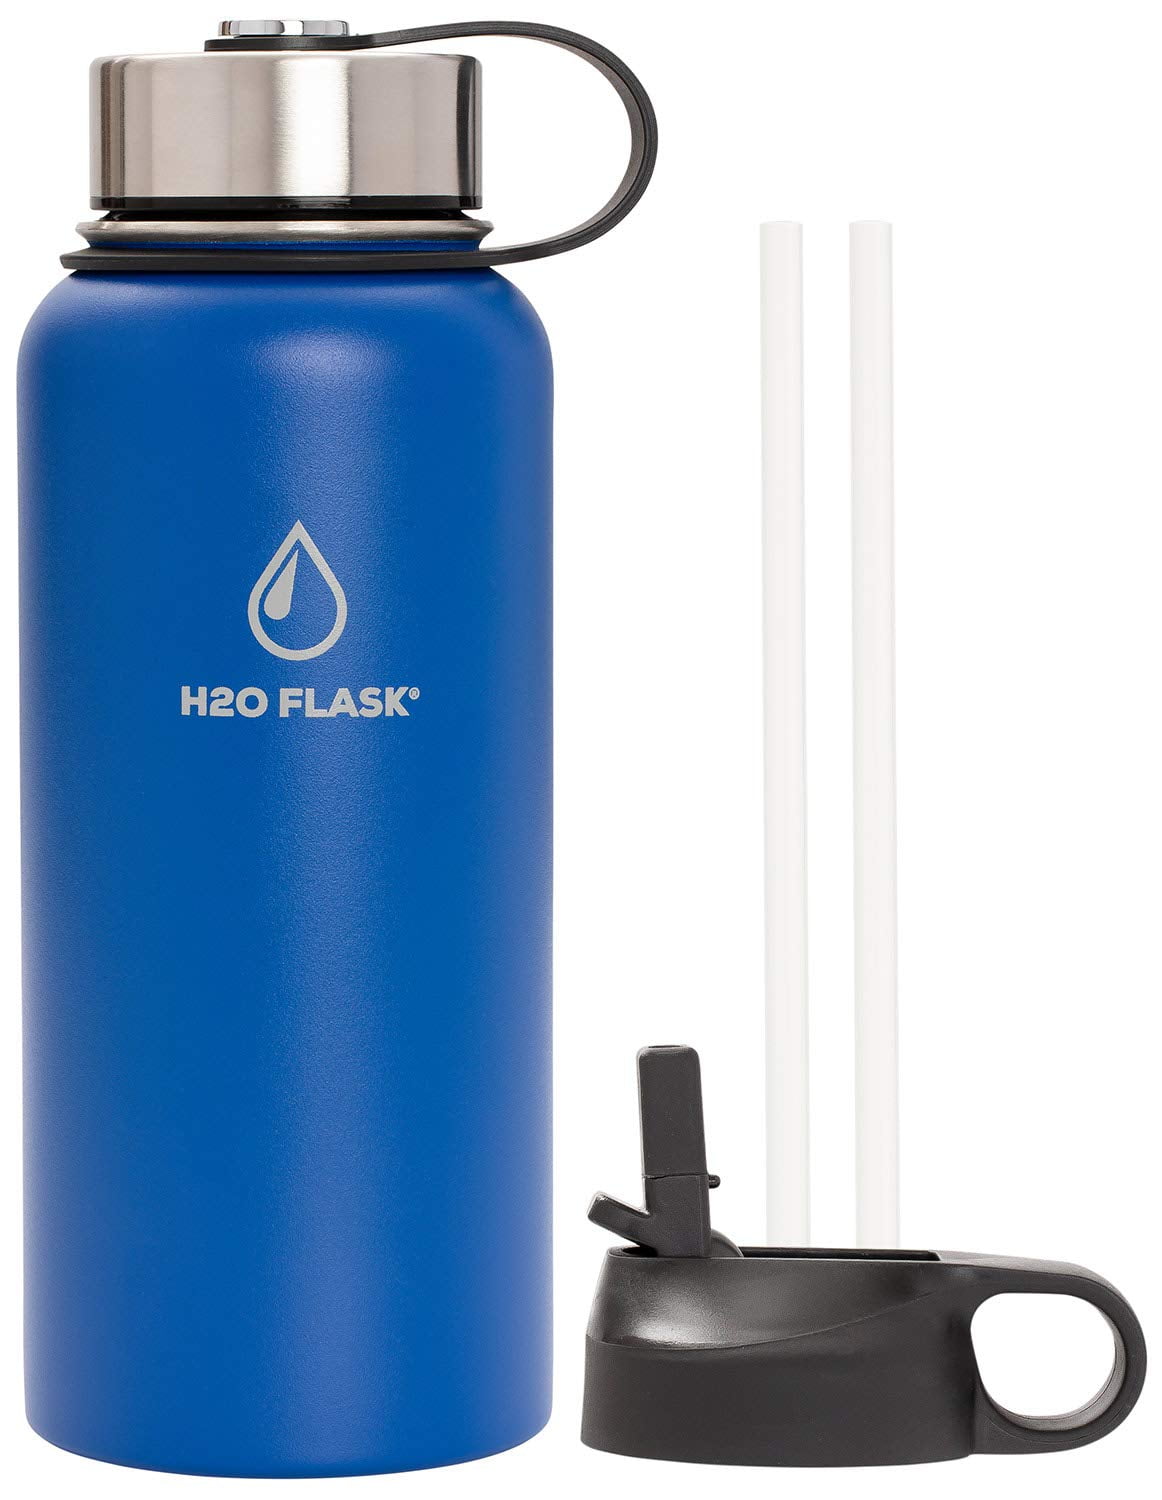 H2O Flask Double Wall Stainless Steel Insulated Water Bottle, 32 oz Blue